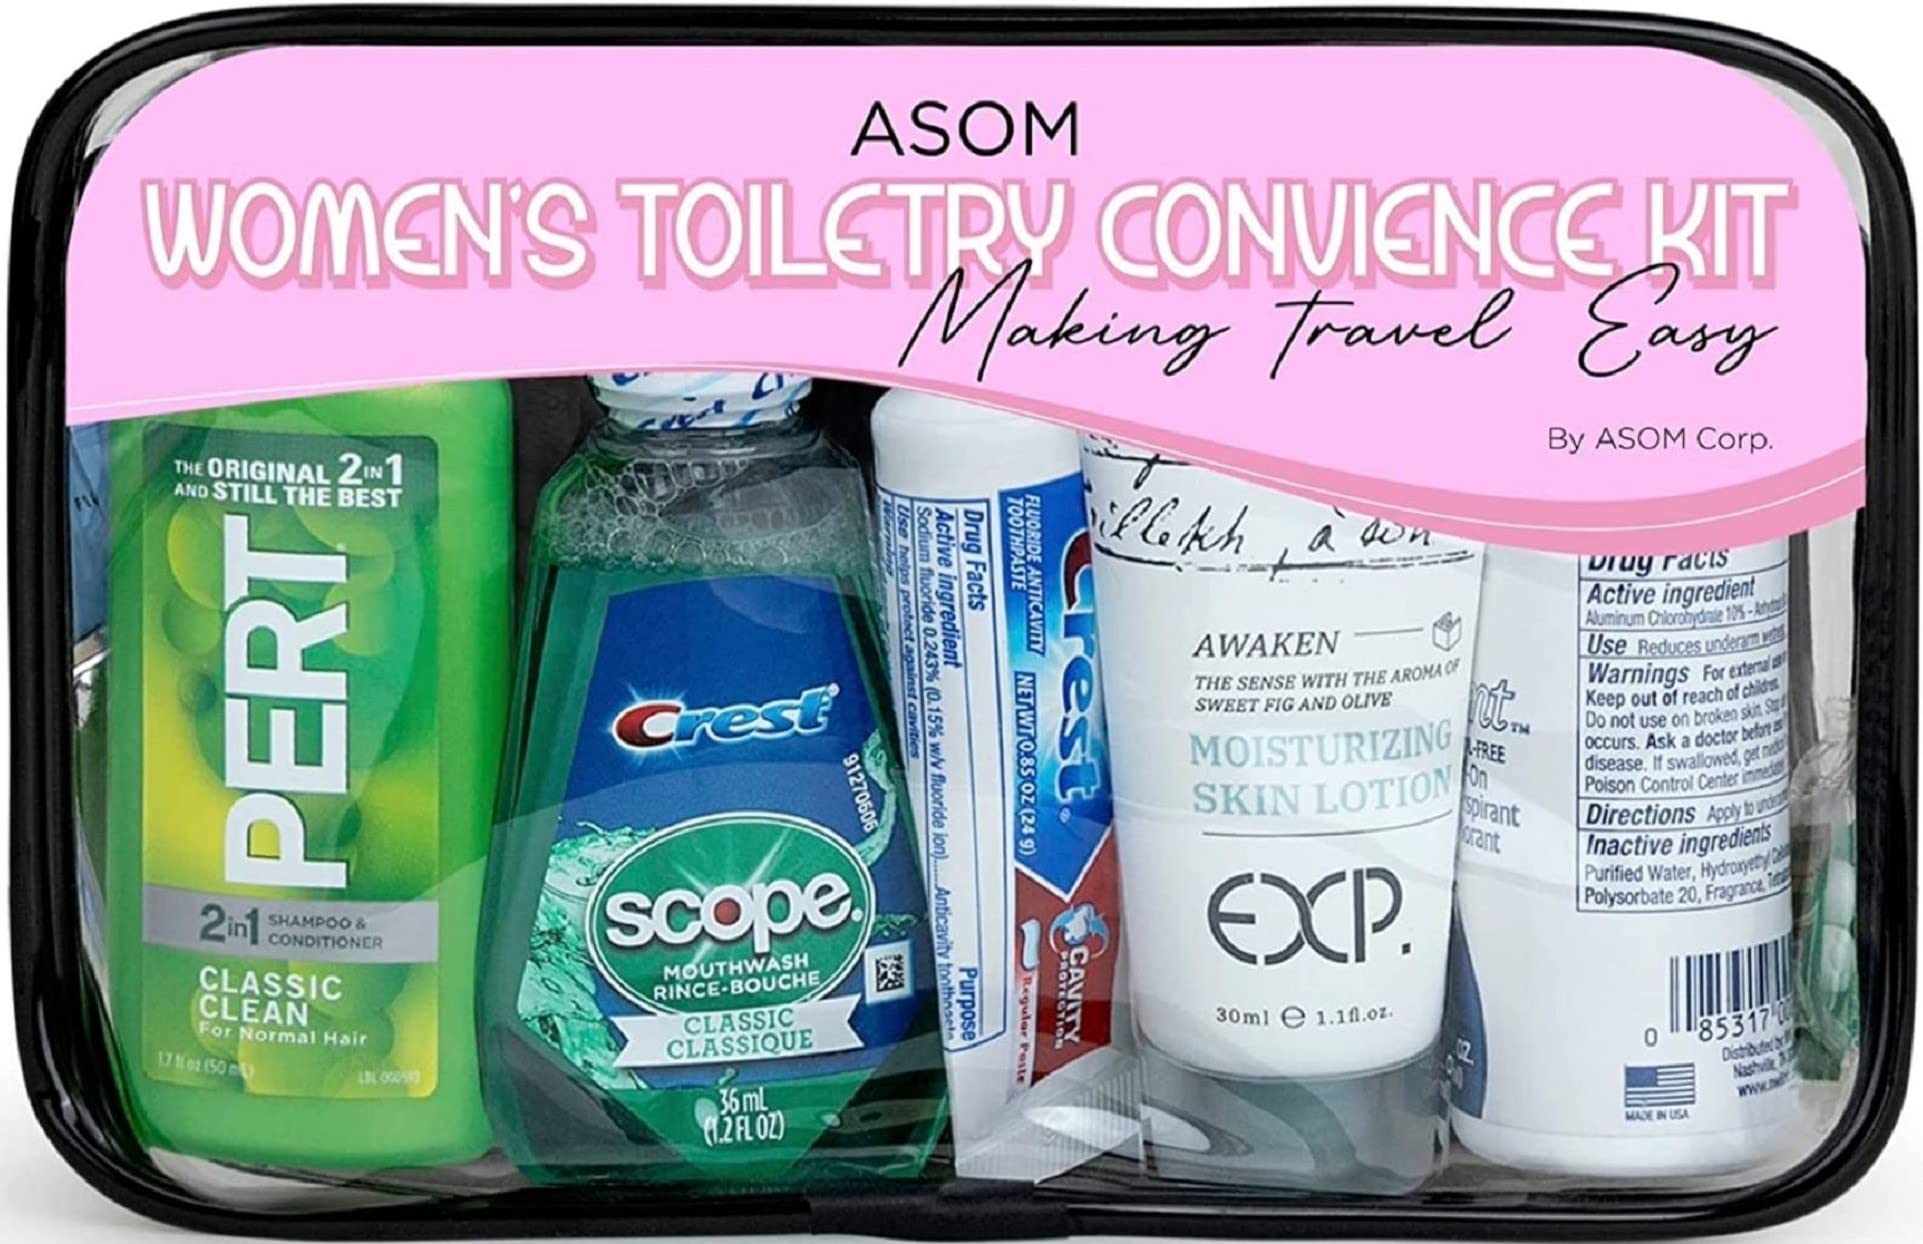 Asom Toiletry Travel Kit, Quality Hygiene Essentials Traveling Toiletries  Prefilled Accessories Convenience Set, Tsa Approved Women